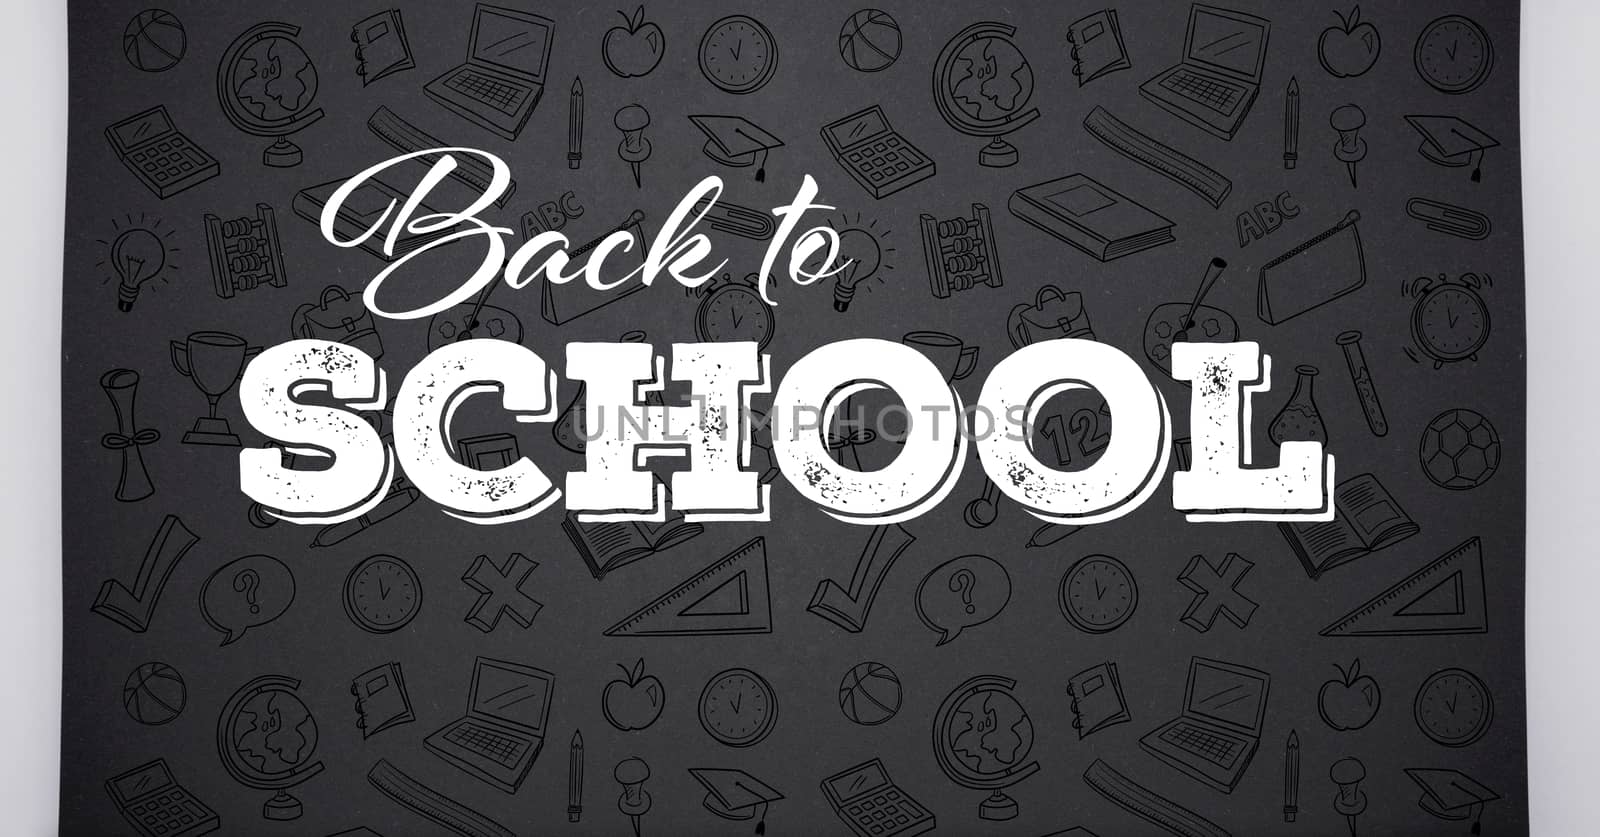 Back to school text with education graphics on blackboard by Wavebreakmedia